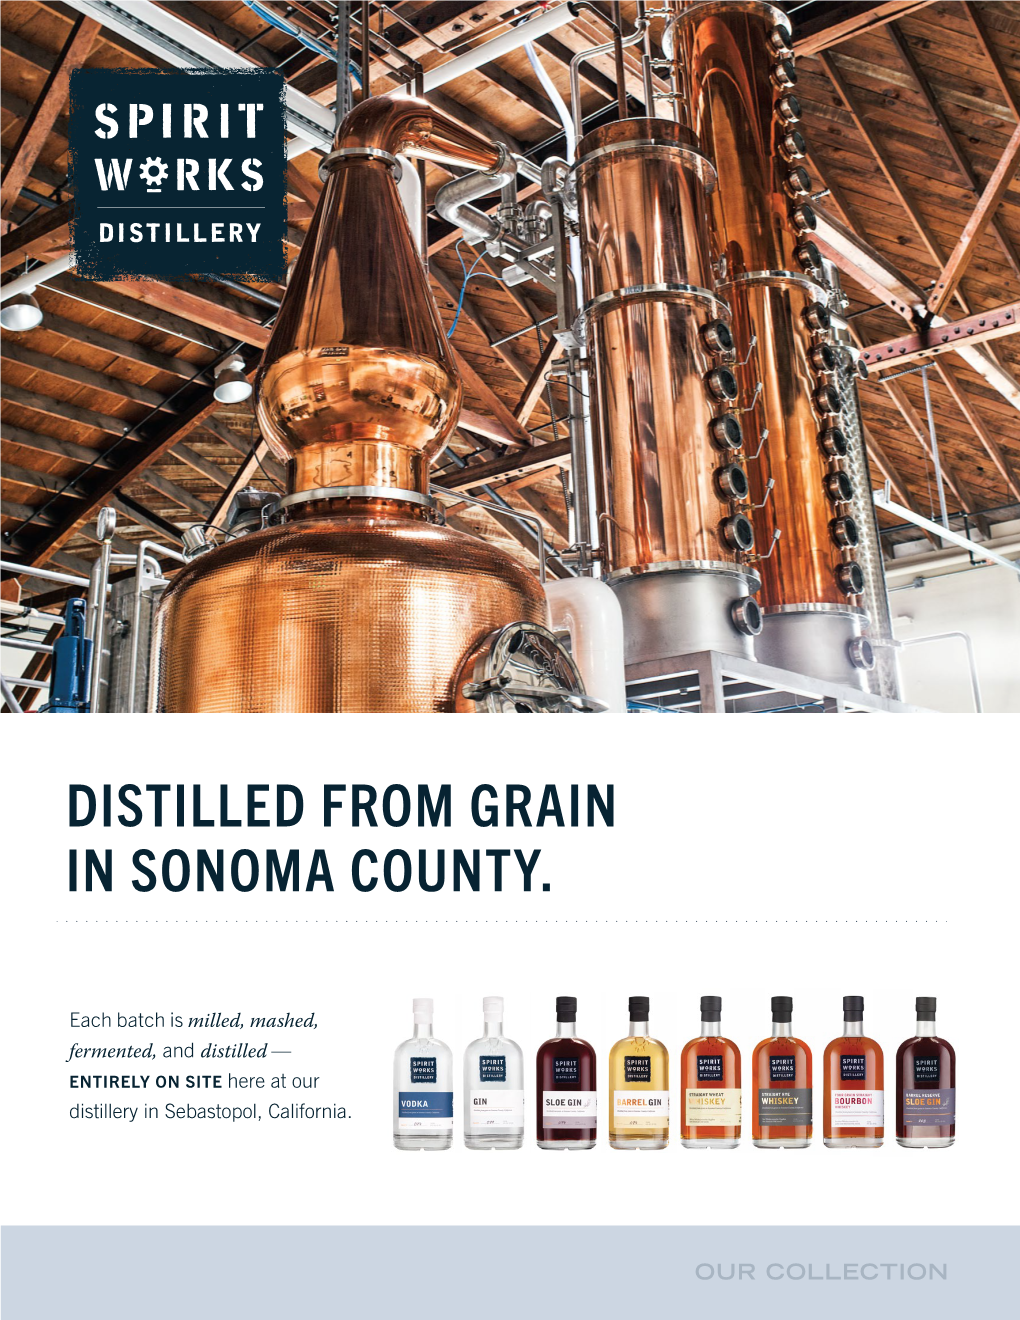 Distilled from Grain in Sonoma County